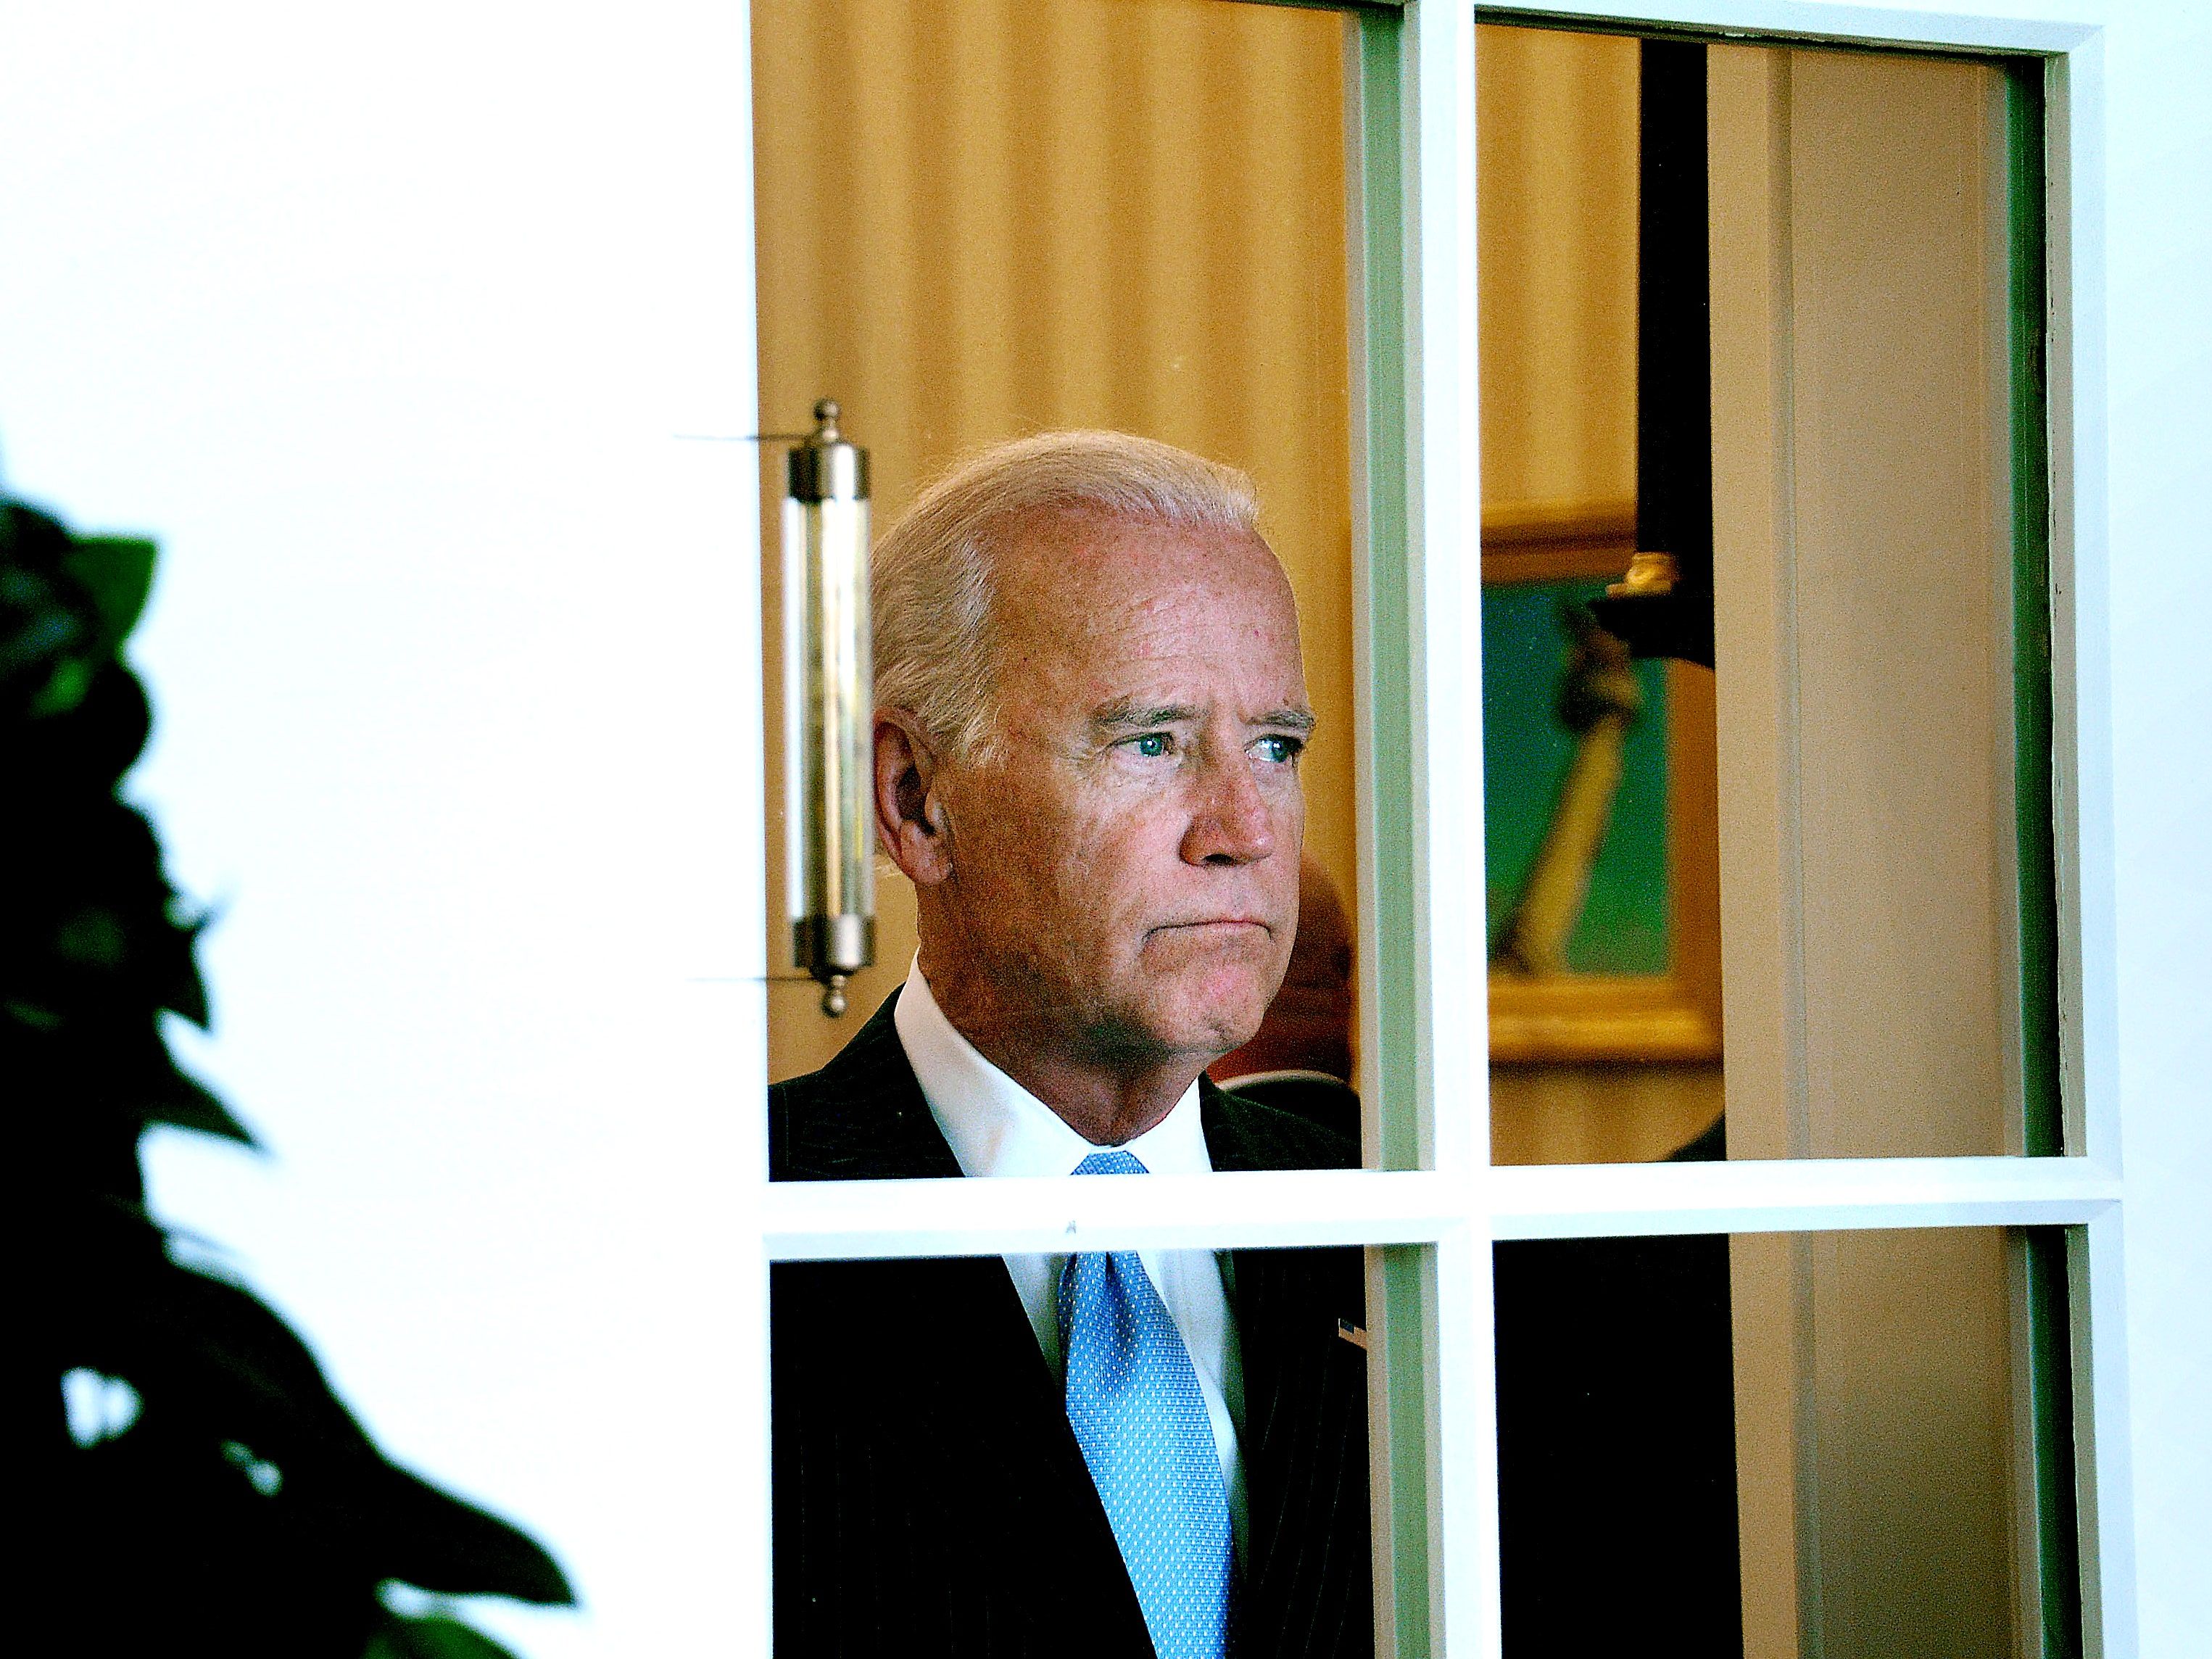 A Joe Biden Nomination Would Solidify All Our Worst Fears About the Democrats